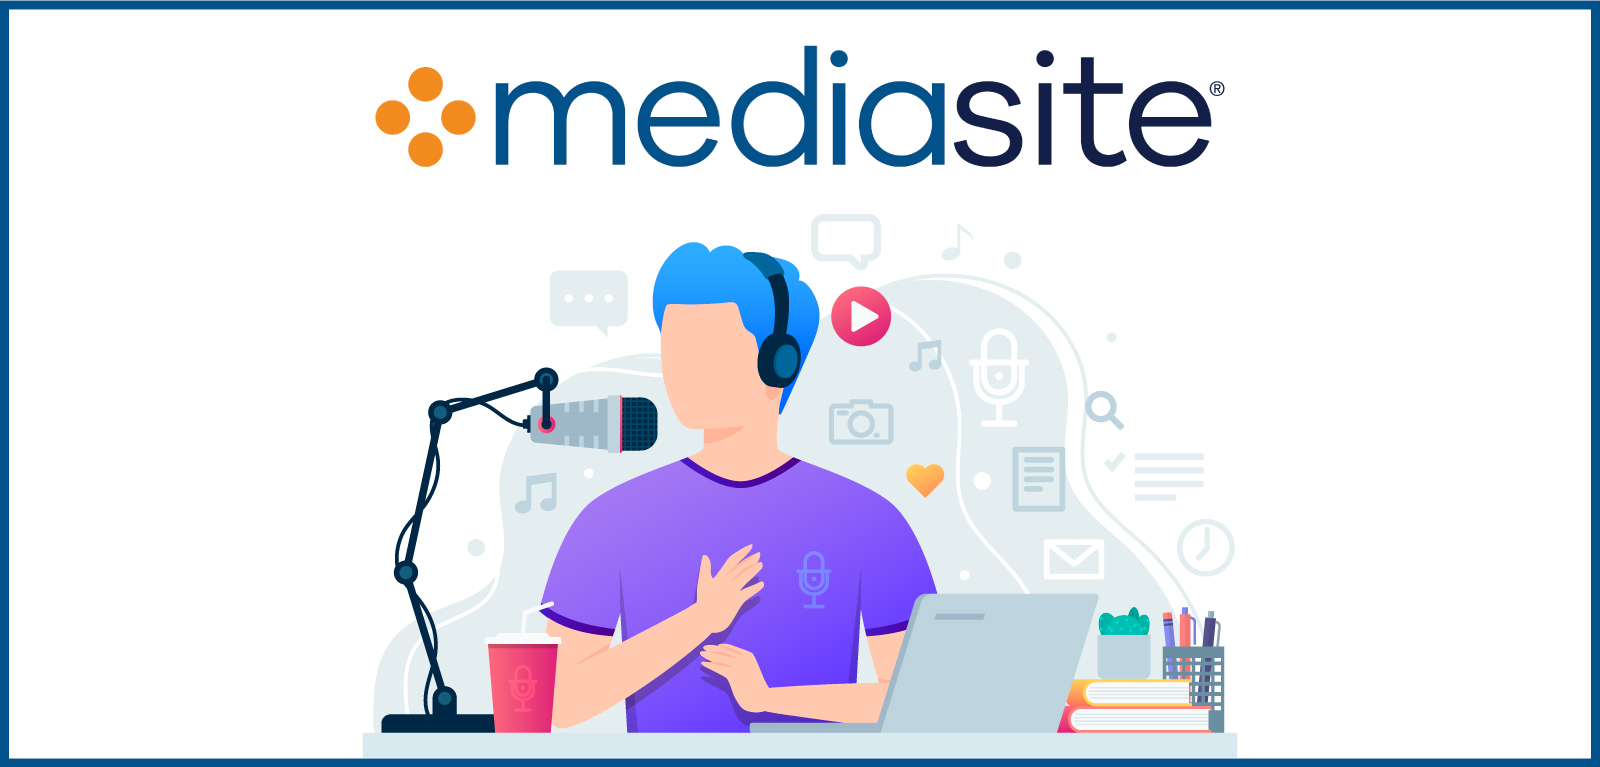 Man sitting doing a podcast with Mediasite logo